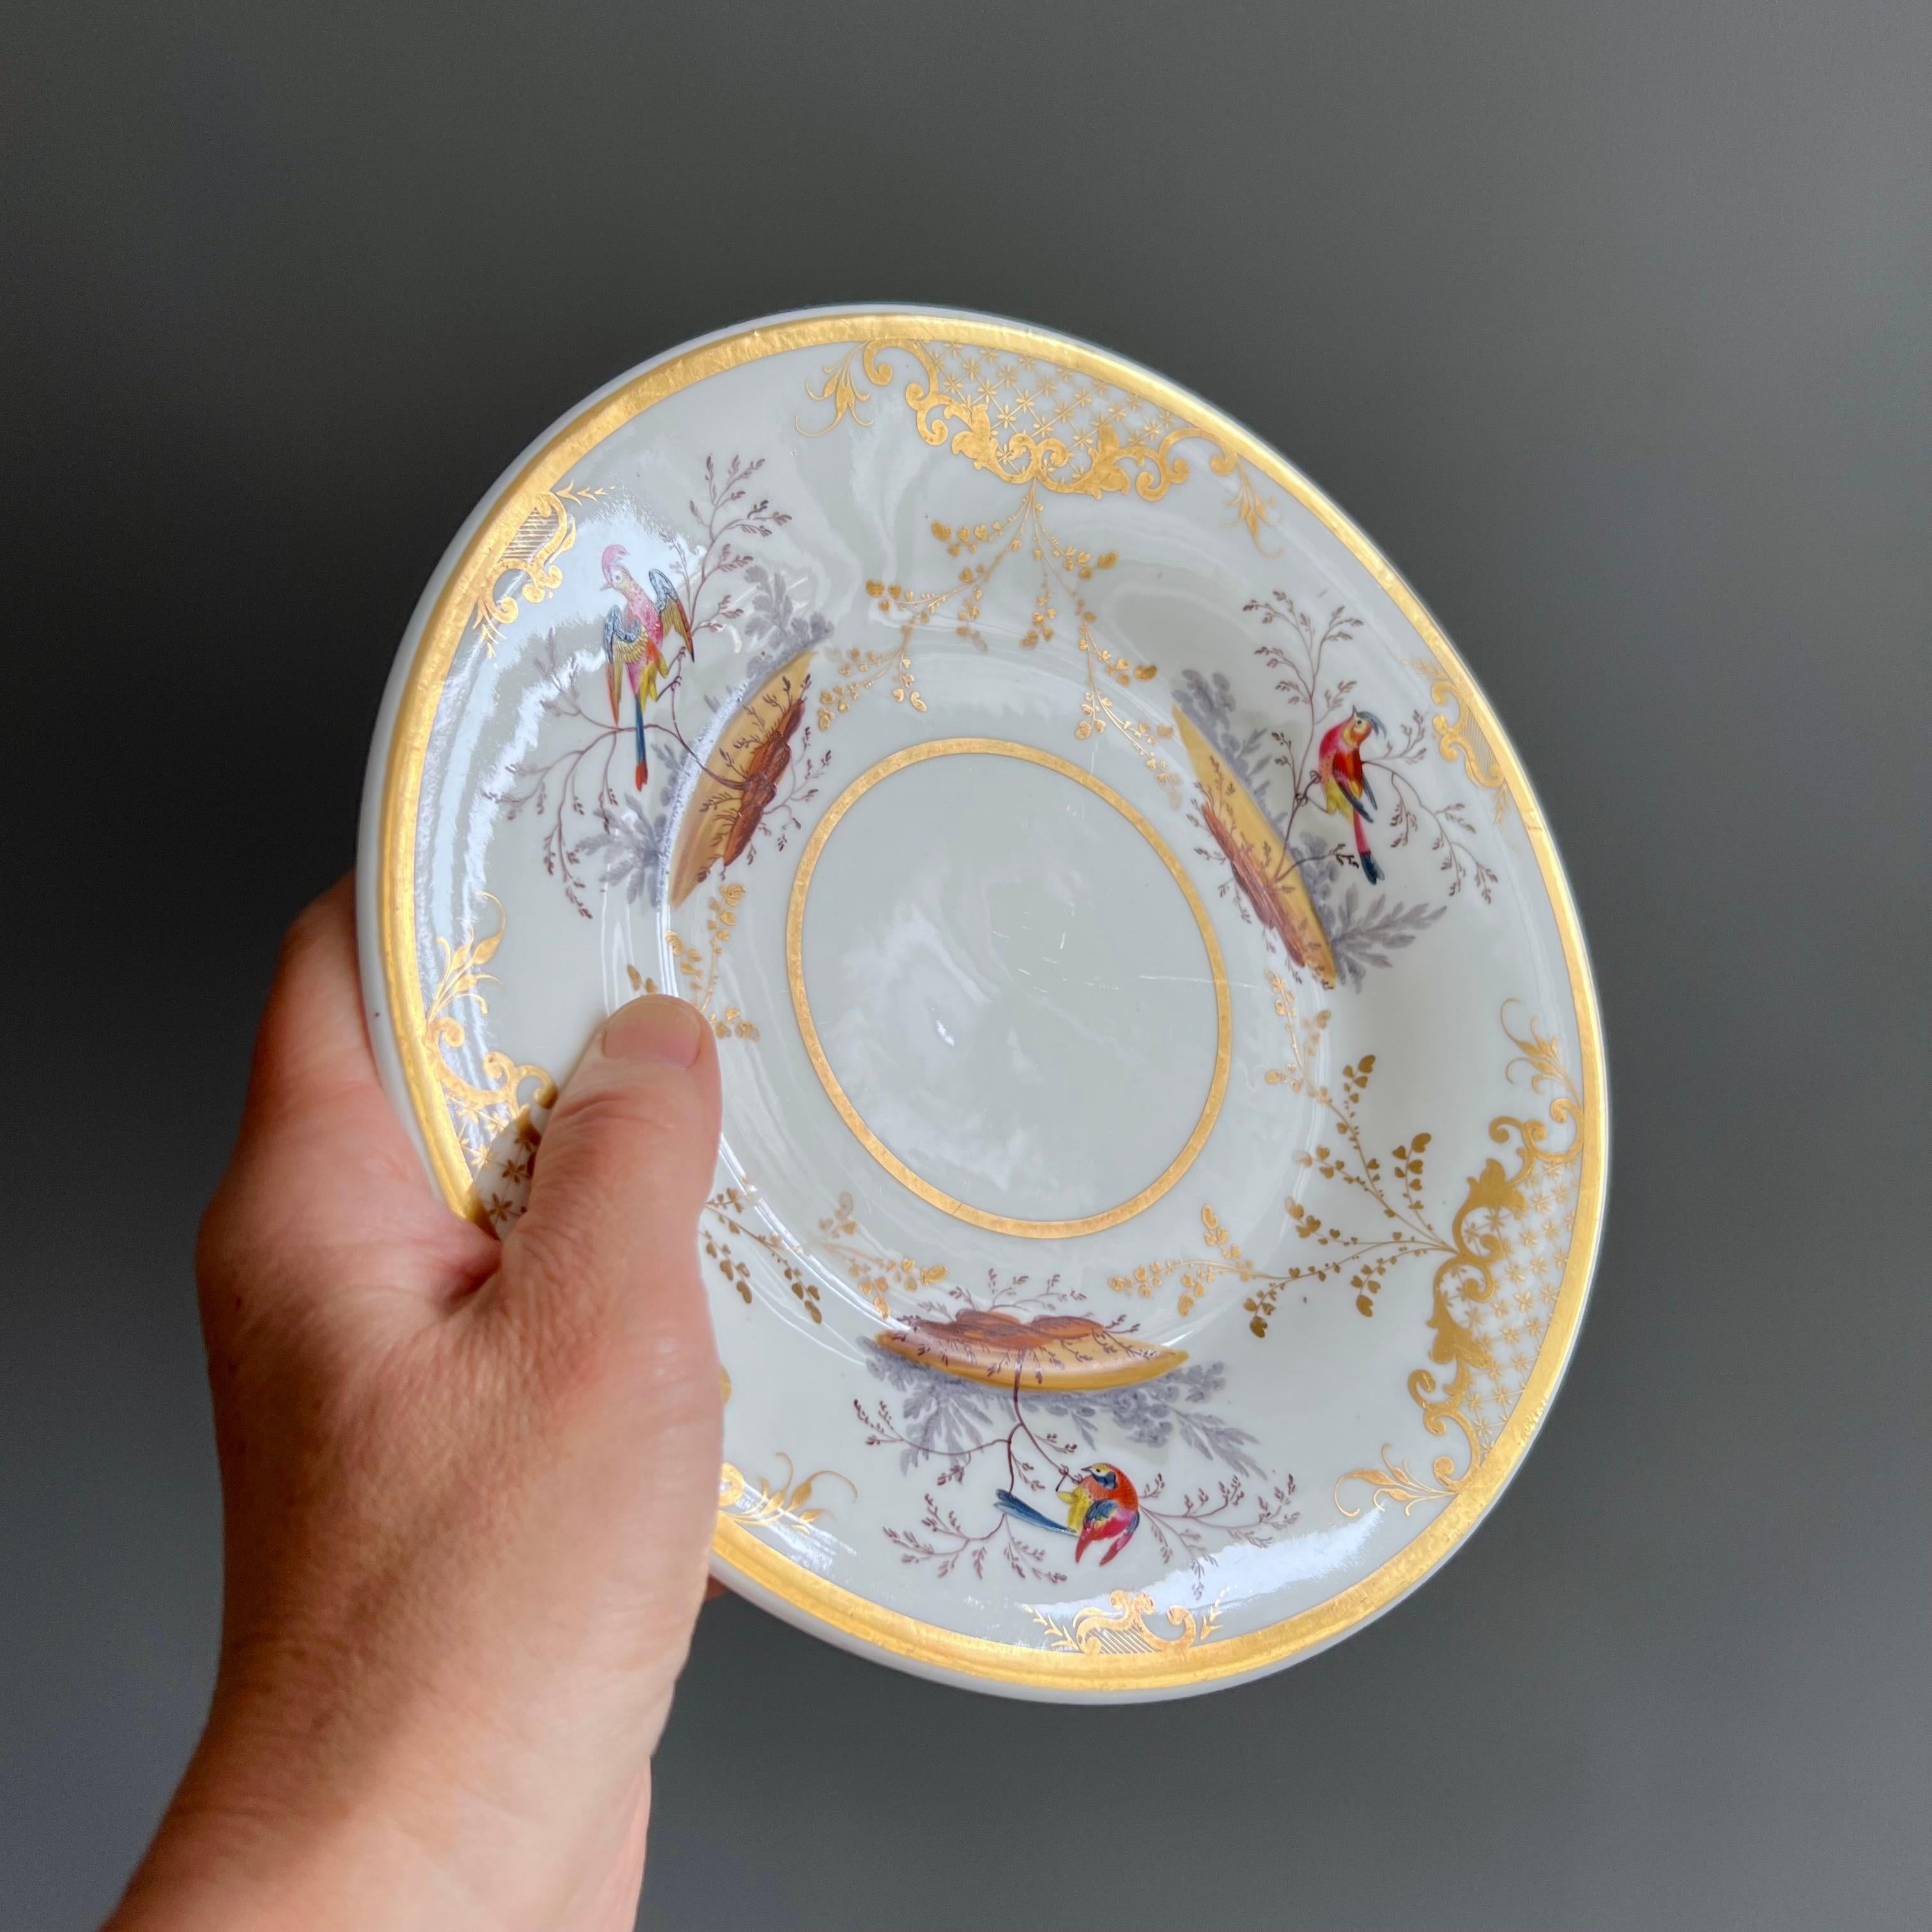 This is a charming plate made by H&R Daniel in about 1832. The plate is potted in the simple 